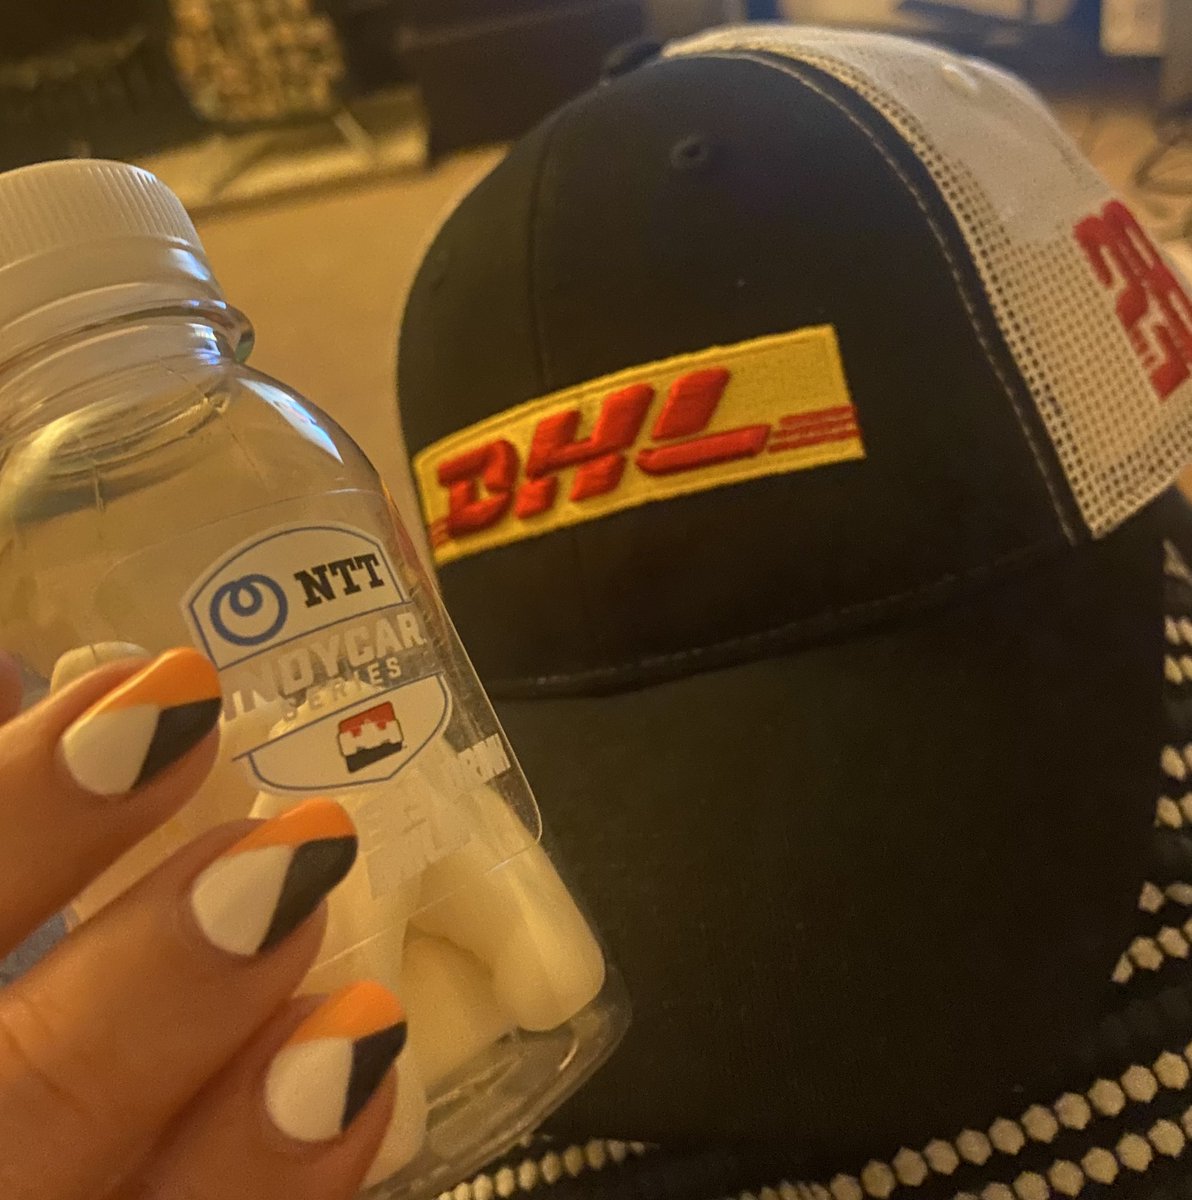 What a treat to come home to! 💛❤️💛

Thanks @FormulaModelSh1 - for the cap and for flying the #Indycar flag over here in the UK!!

(but mostly for the sweets - always loved milk bottles and these are bigger than normal - was destined to be an Indycar fan! 😜)

#WinnersDrinkMilk